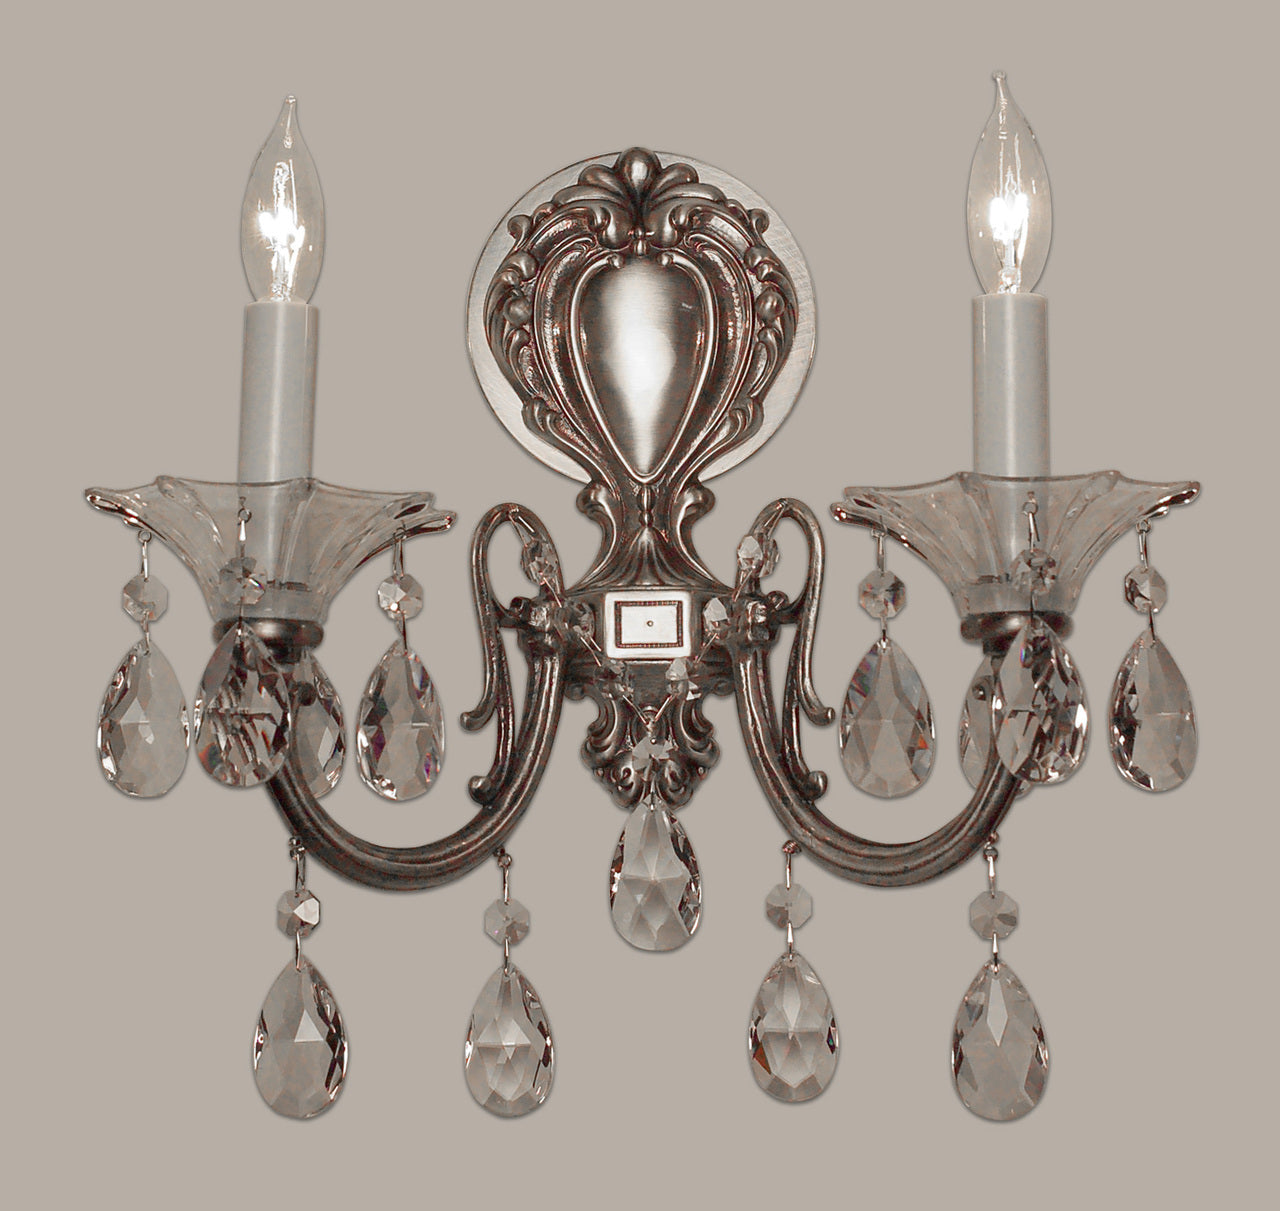 Classic Lighting 57052 RB SGT Via Lombardi Crystal Wall Sconce in Roman Bronze (Imported from Spain)